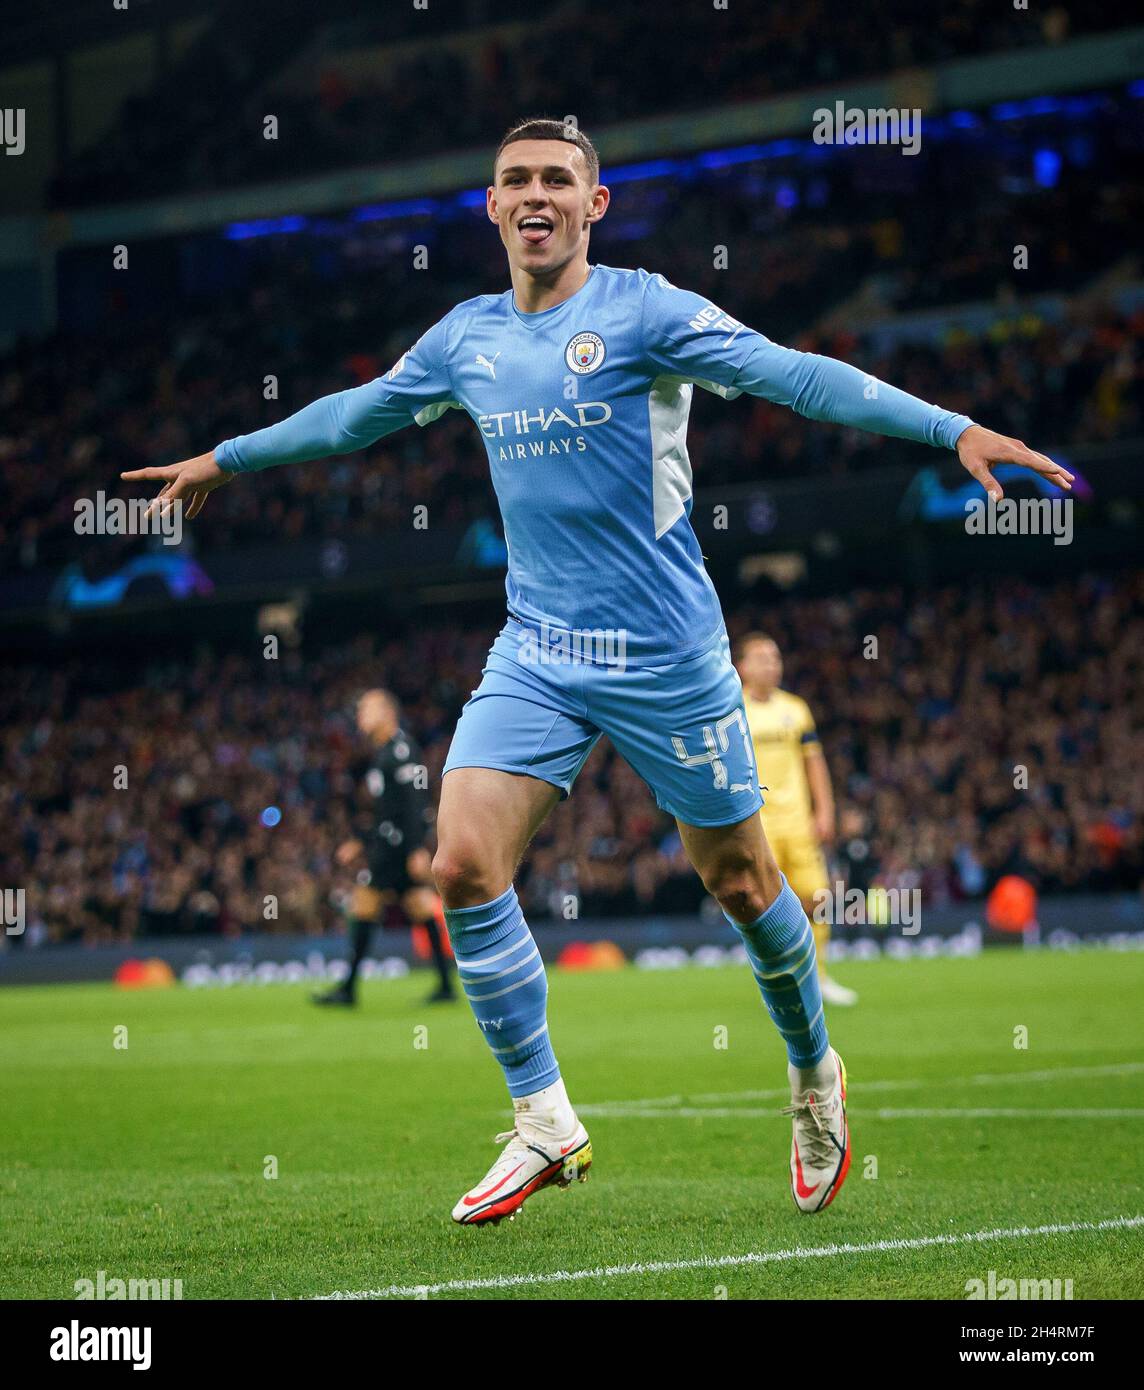 Manchester, UK. 03rd Nov, 2021. Phil Foden of Man City celebrates his goal making it 1-0 during the UEFA Champions League match between Manchester City and Club Brugge at the Etihad Stadium, Manchester, England on 3 November 2021. Photo by Andy Rowland. Credit: PRiME Media Images/Alamy Live News Stock Photo